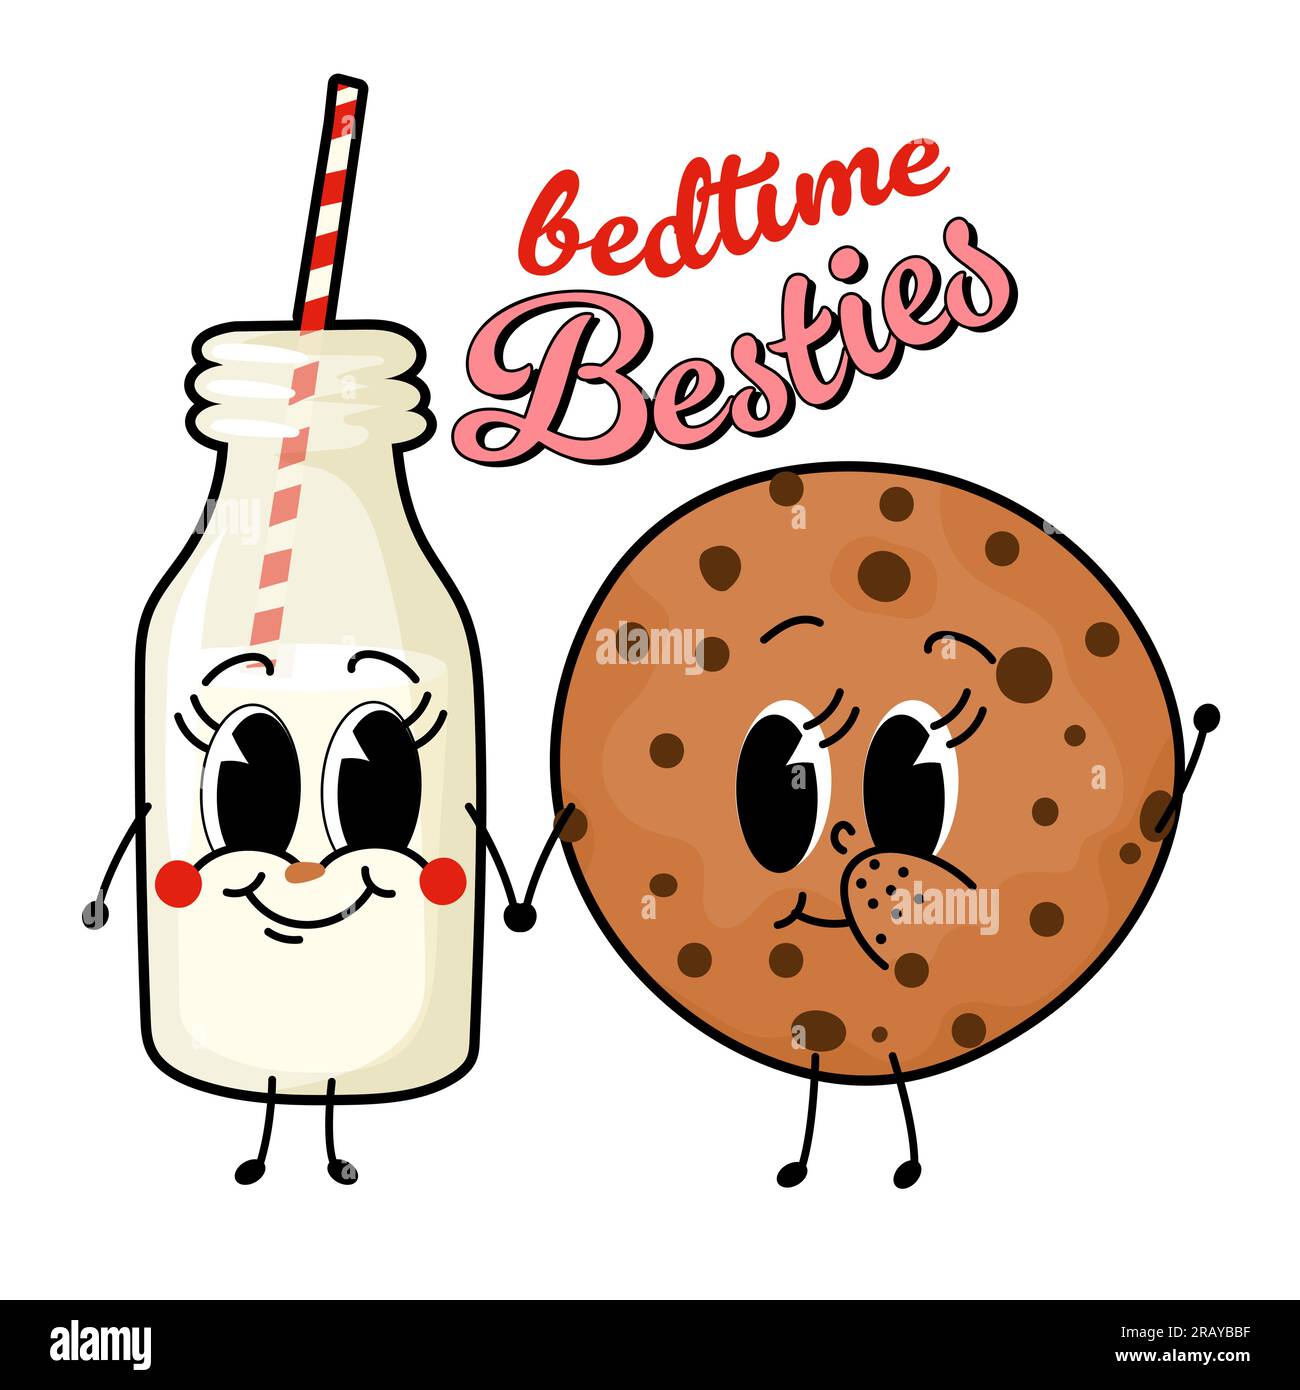 Bedtime besties - Cute hand drawn milk and cookie couple illustration kawaii style. Valentine's Day poster. Good for posters, greeting cards, banners, Stock Vector